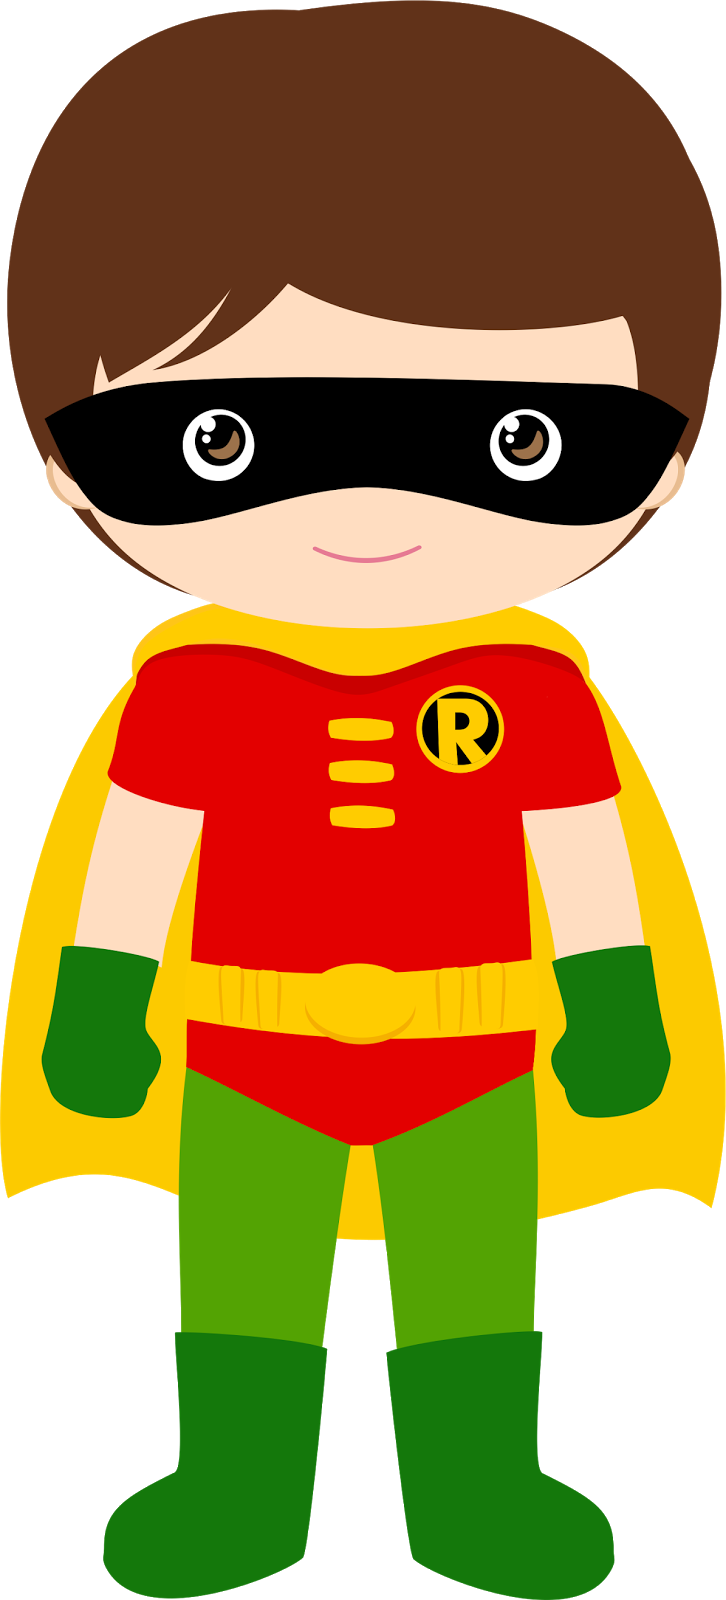 clipart png- funny cartoon heroes - photo #6